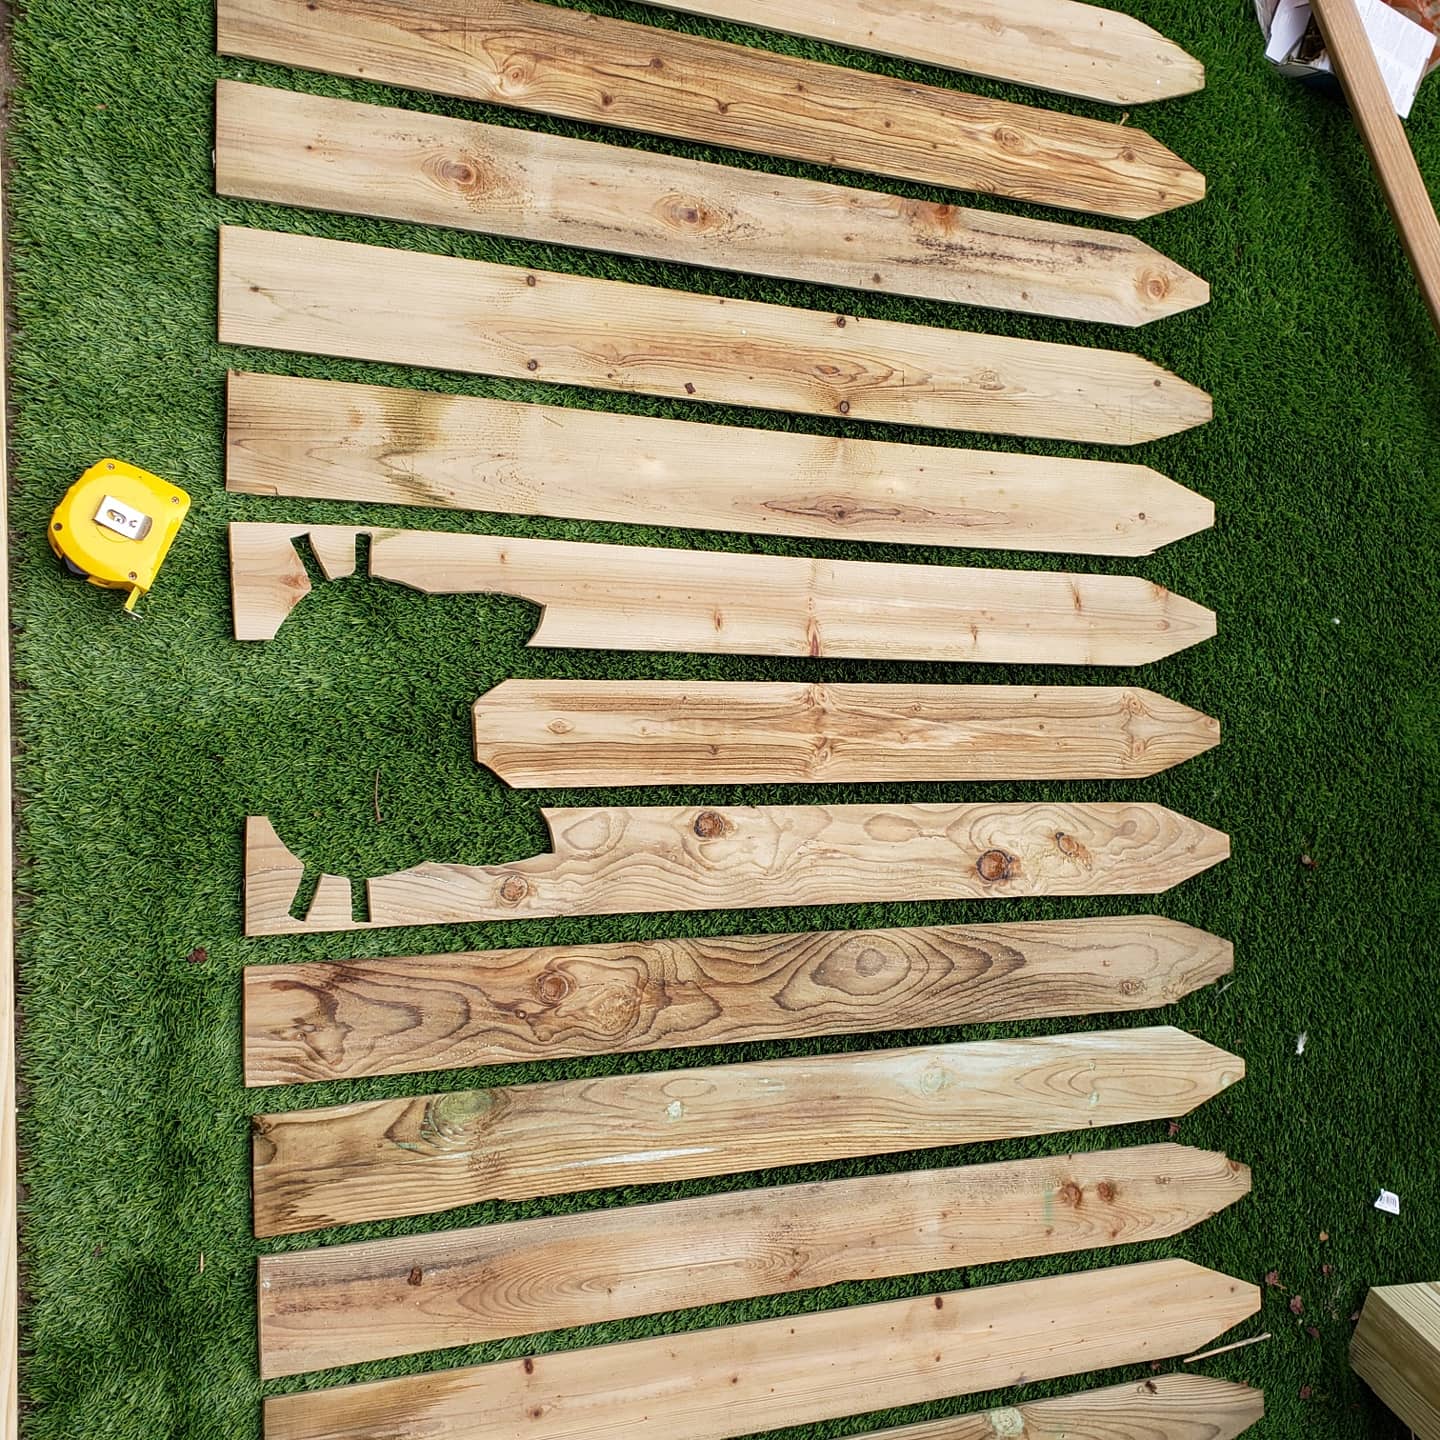 How to make a Picket fence - spacing the pickets